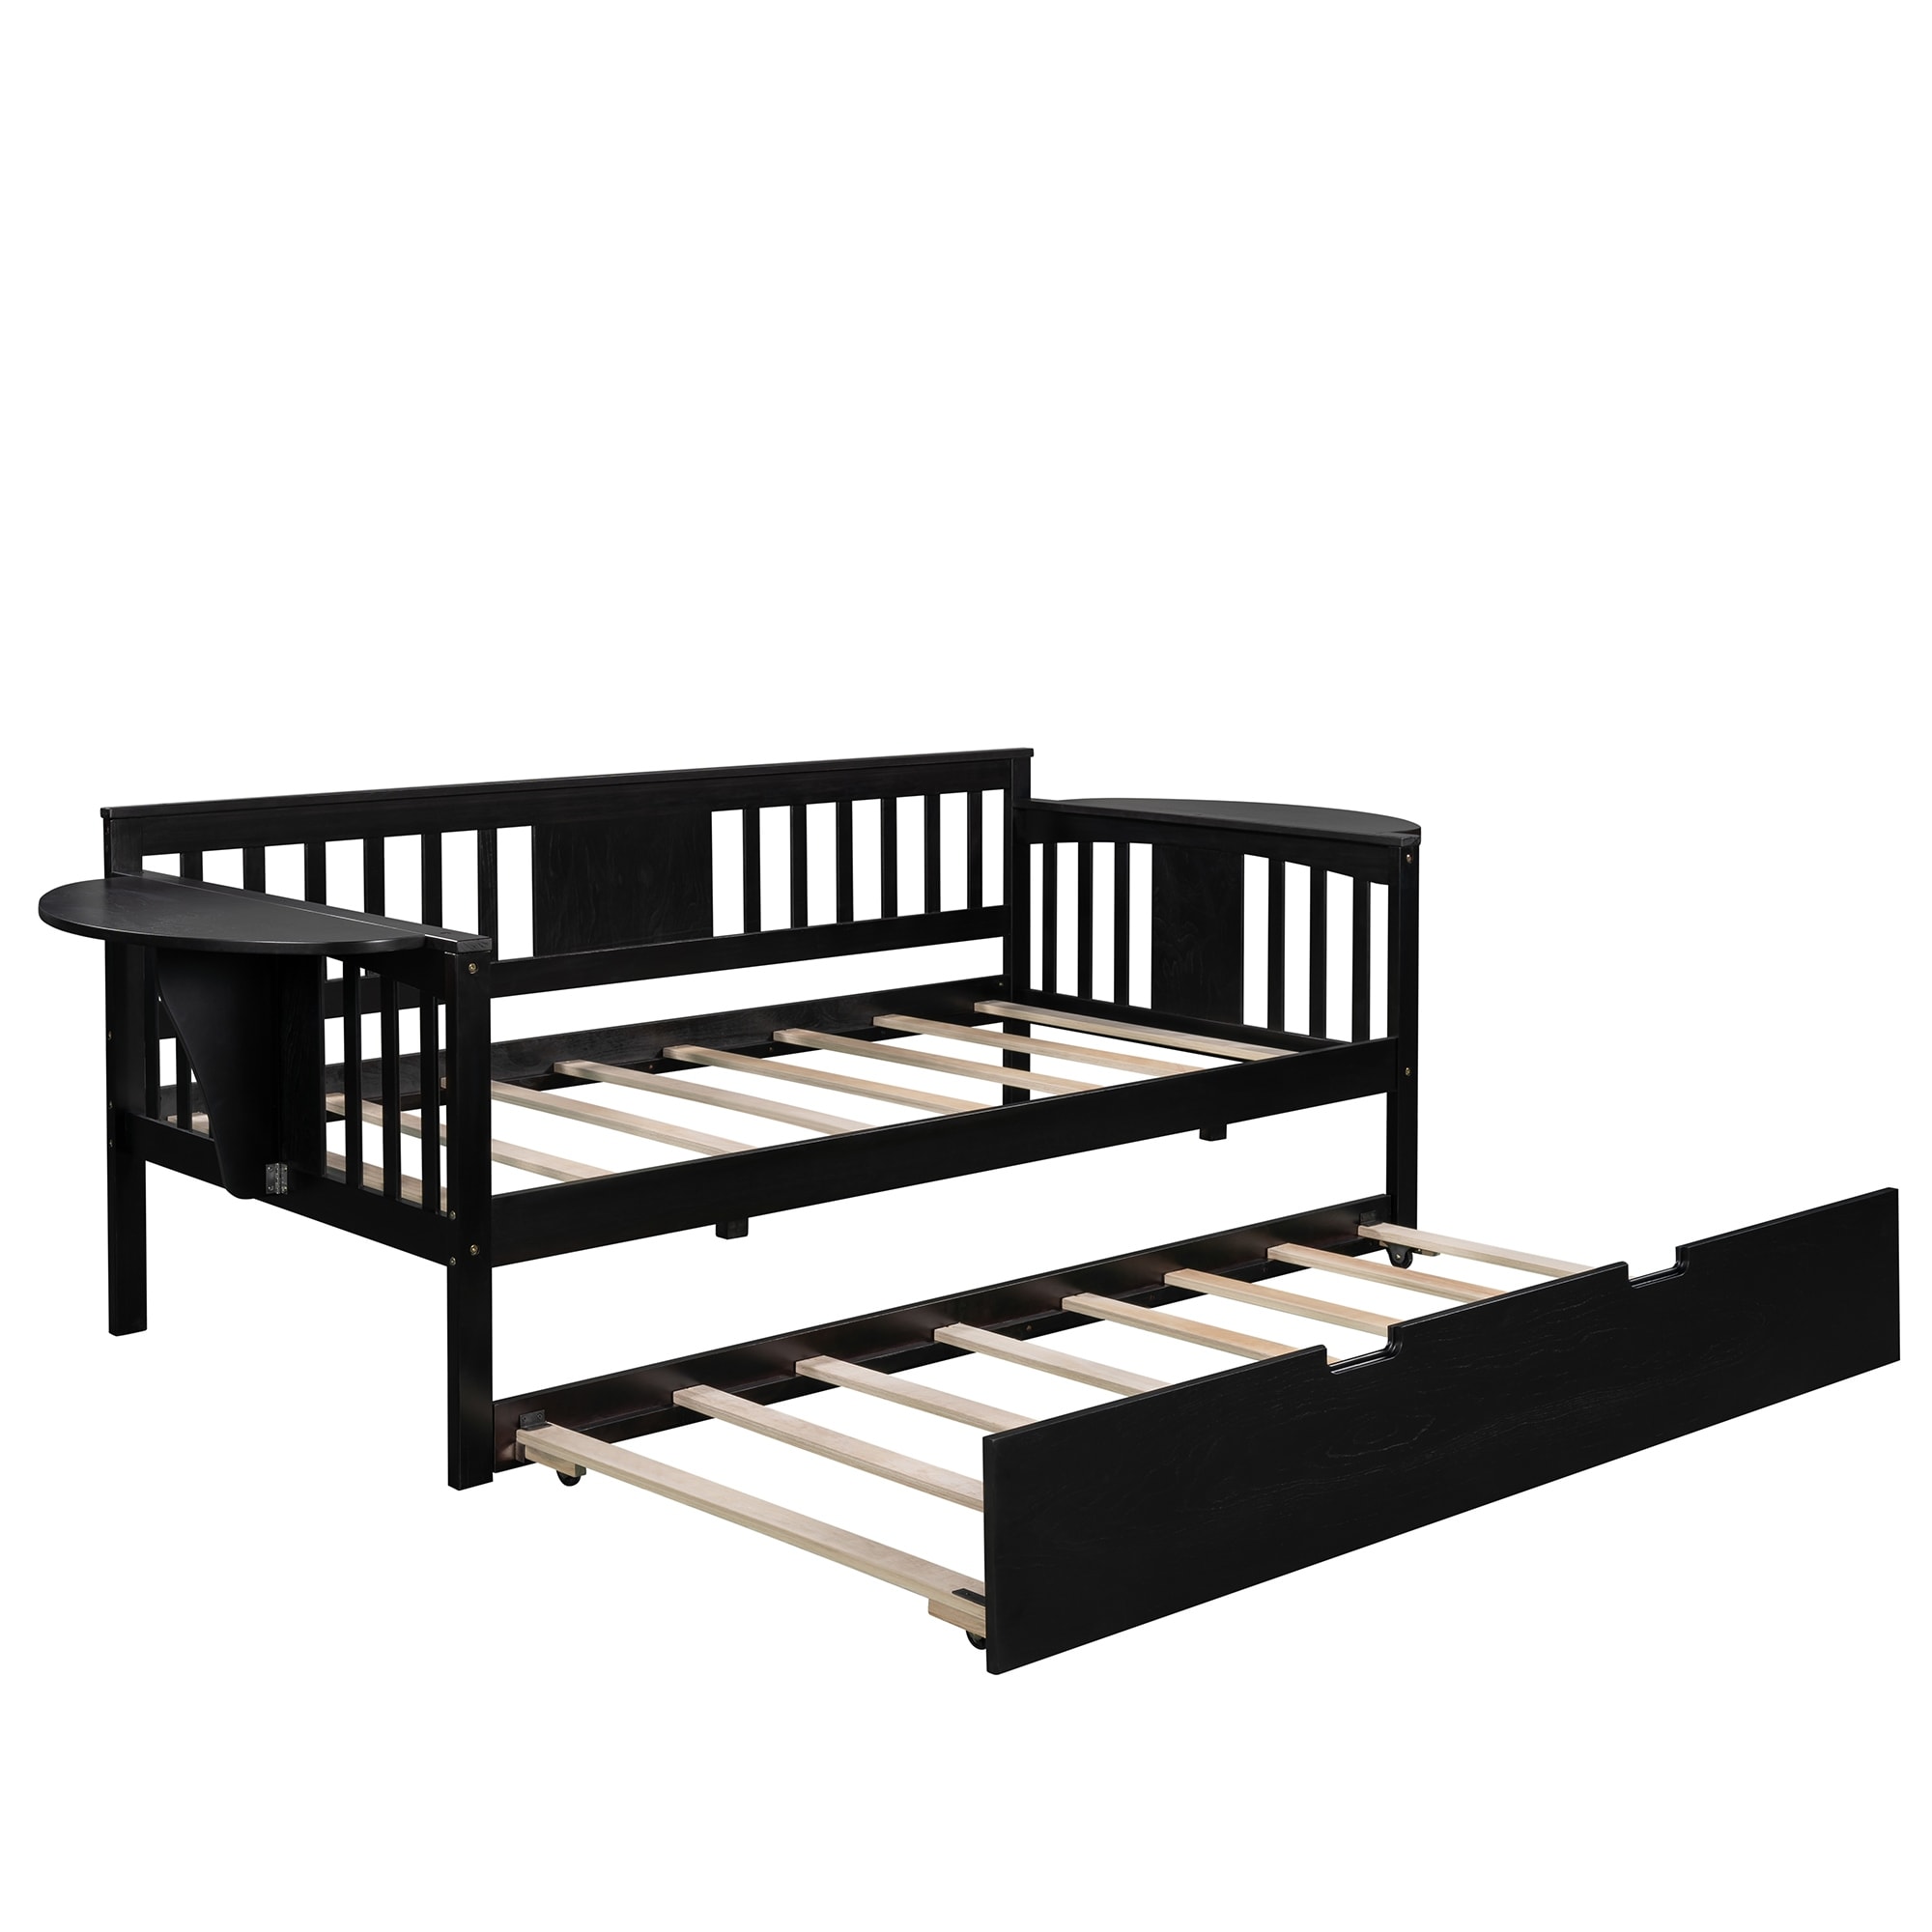 Twin Size Wood Daybed With Trundle and 2 Side Table Shelf For Small Bedroom City Aprtment Dorm